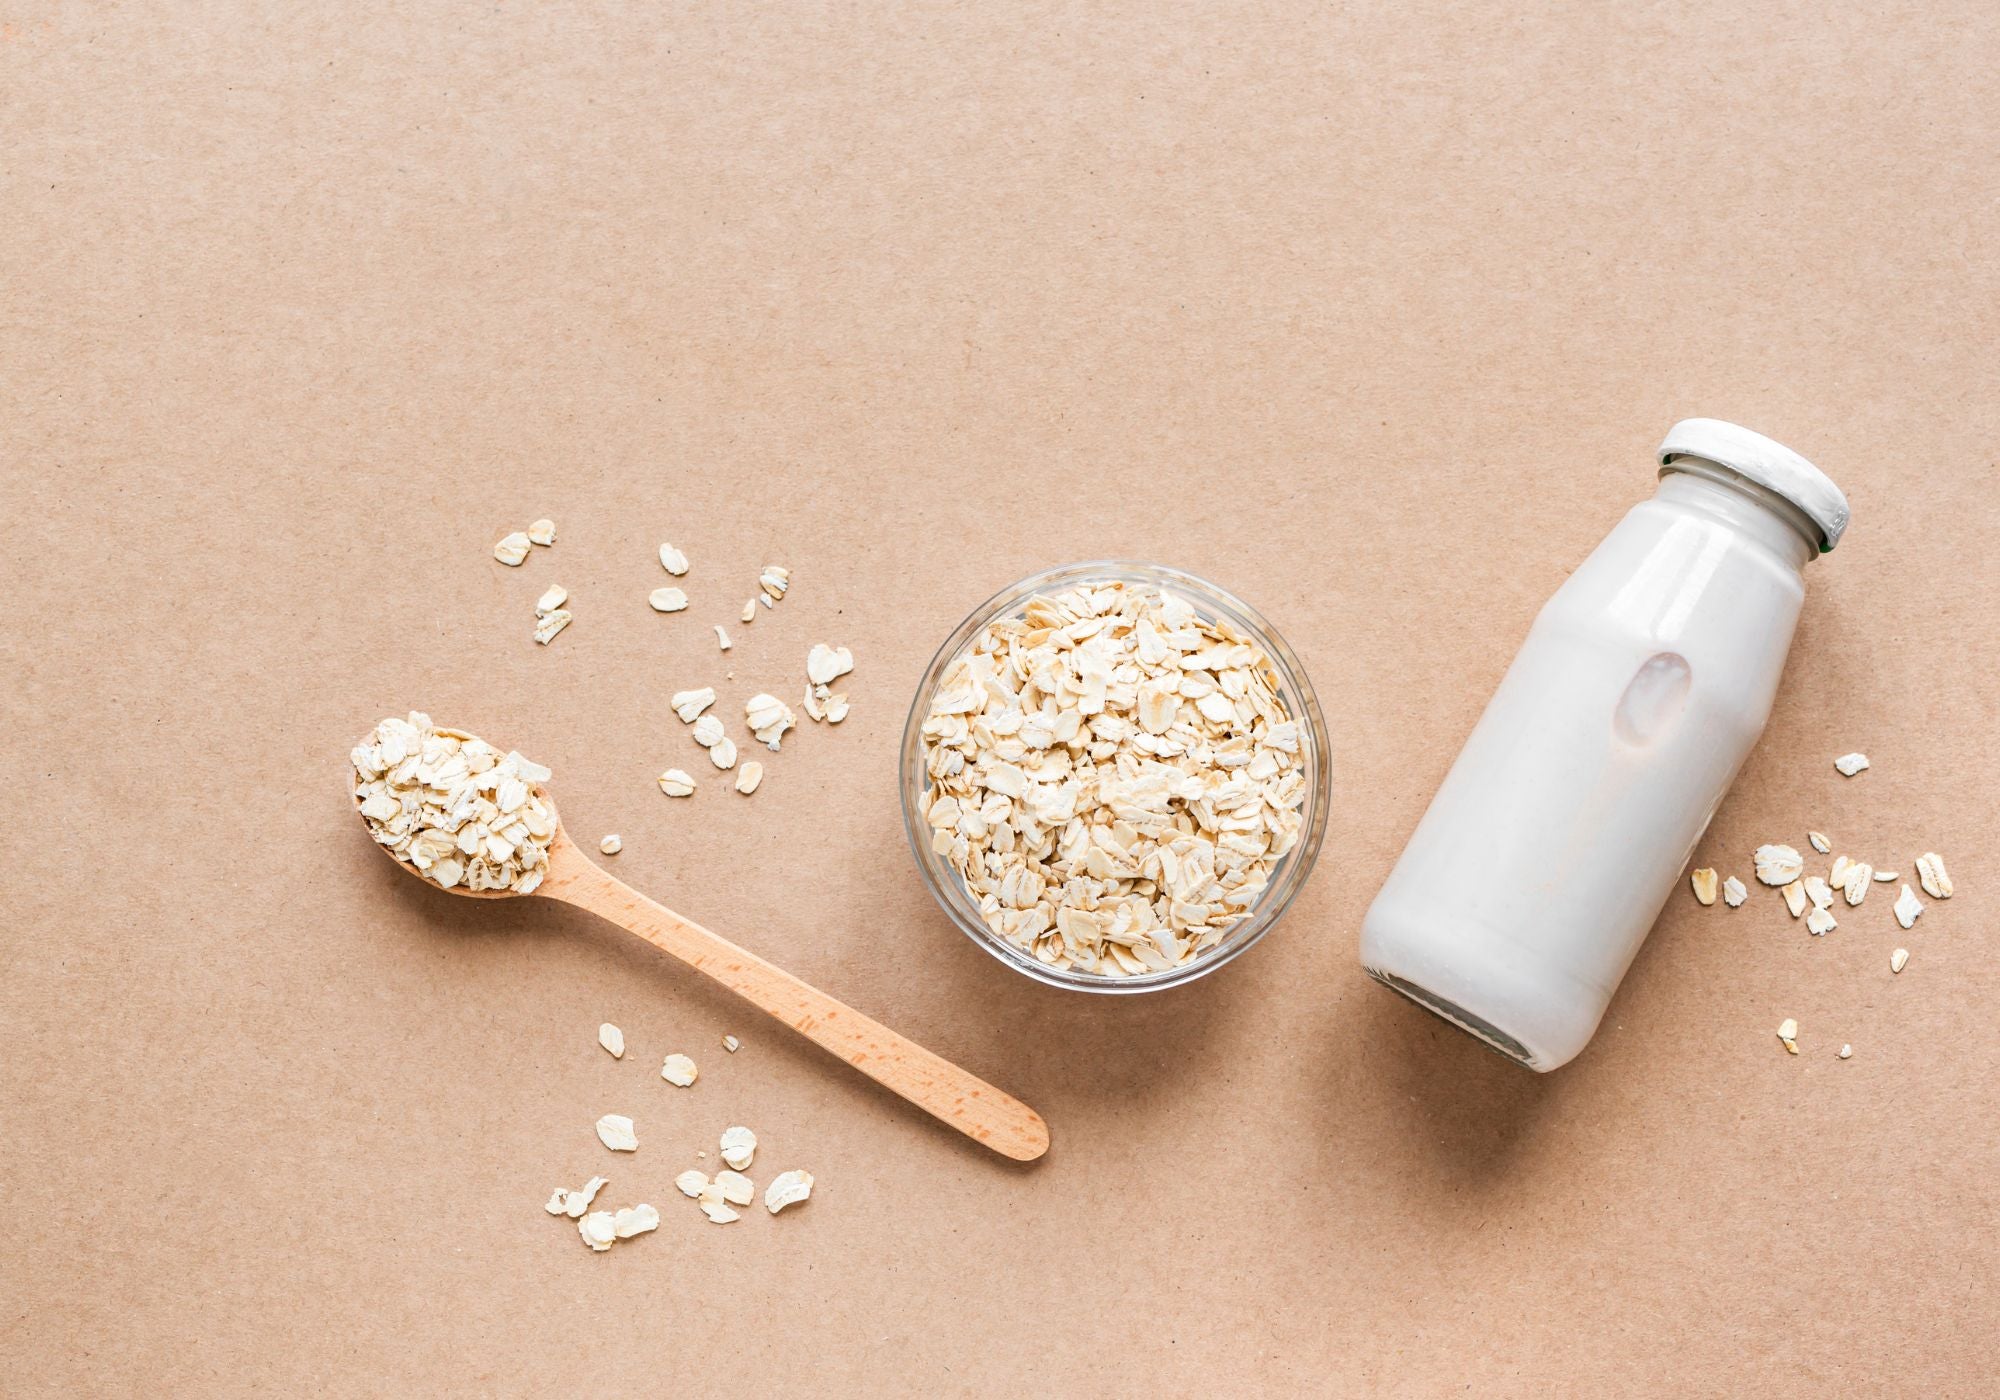 The Oat Milk Dilemma and the Possible Impact on Your Fertility and Blood Sugar